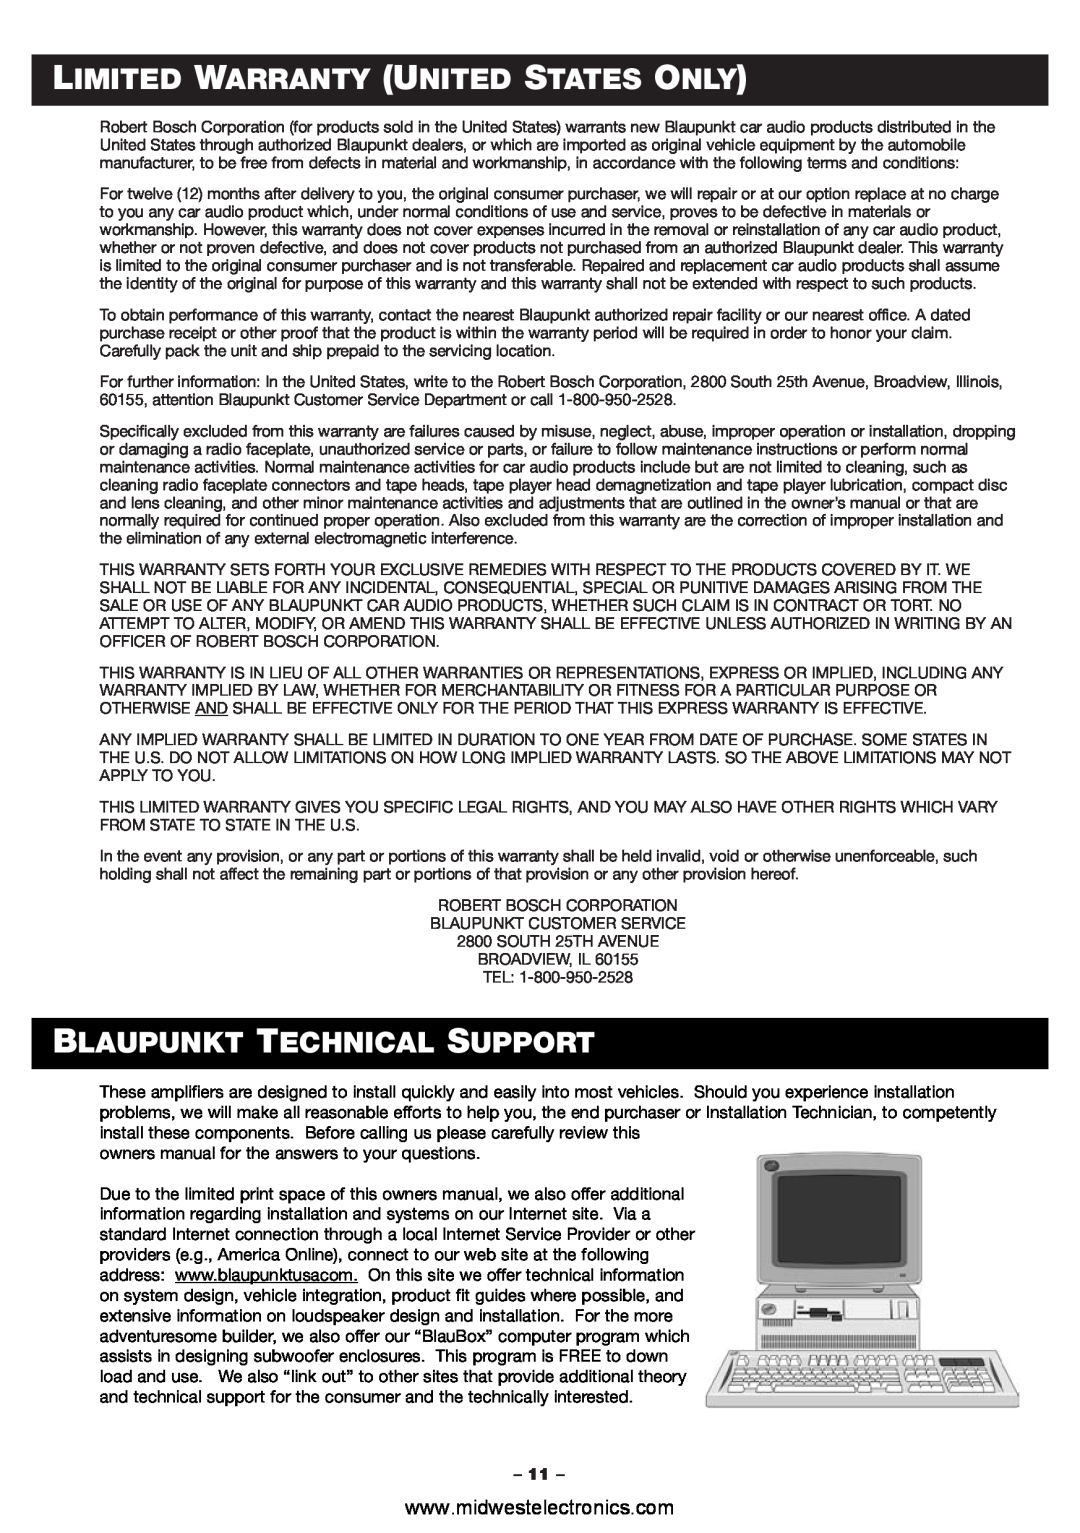 Blaupunkt PCA460 manual Limited Warranty United States Only, Blaupunkt Technical Support 